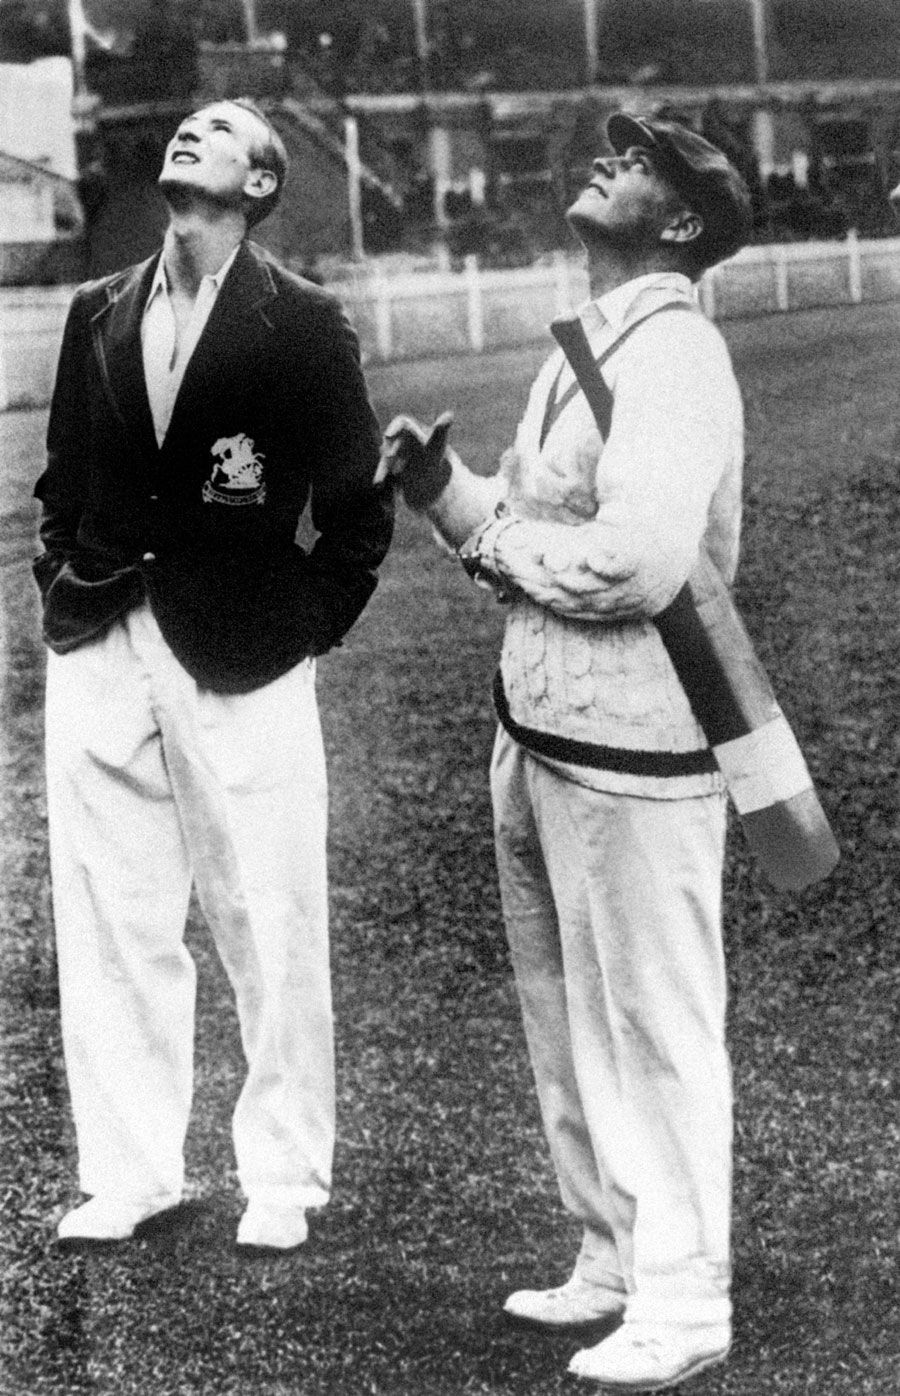 Douglas Jardine and Bill Woodfull: a tame start to cricket's most controversial series